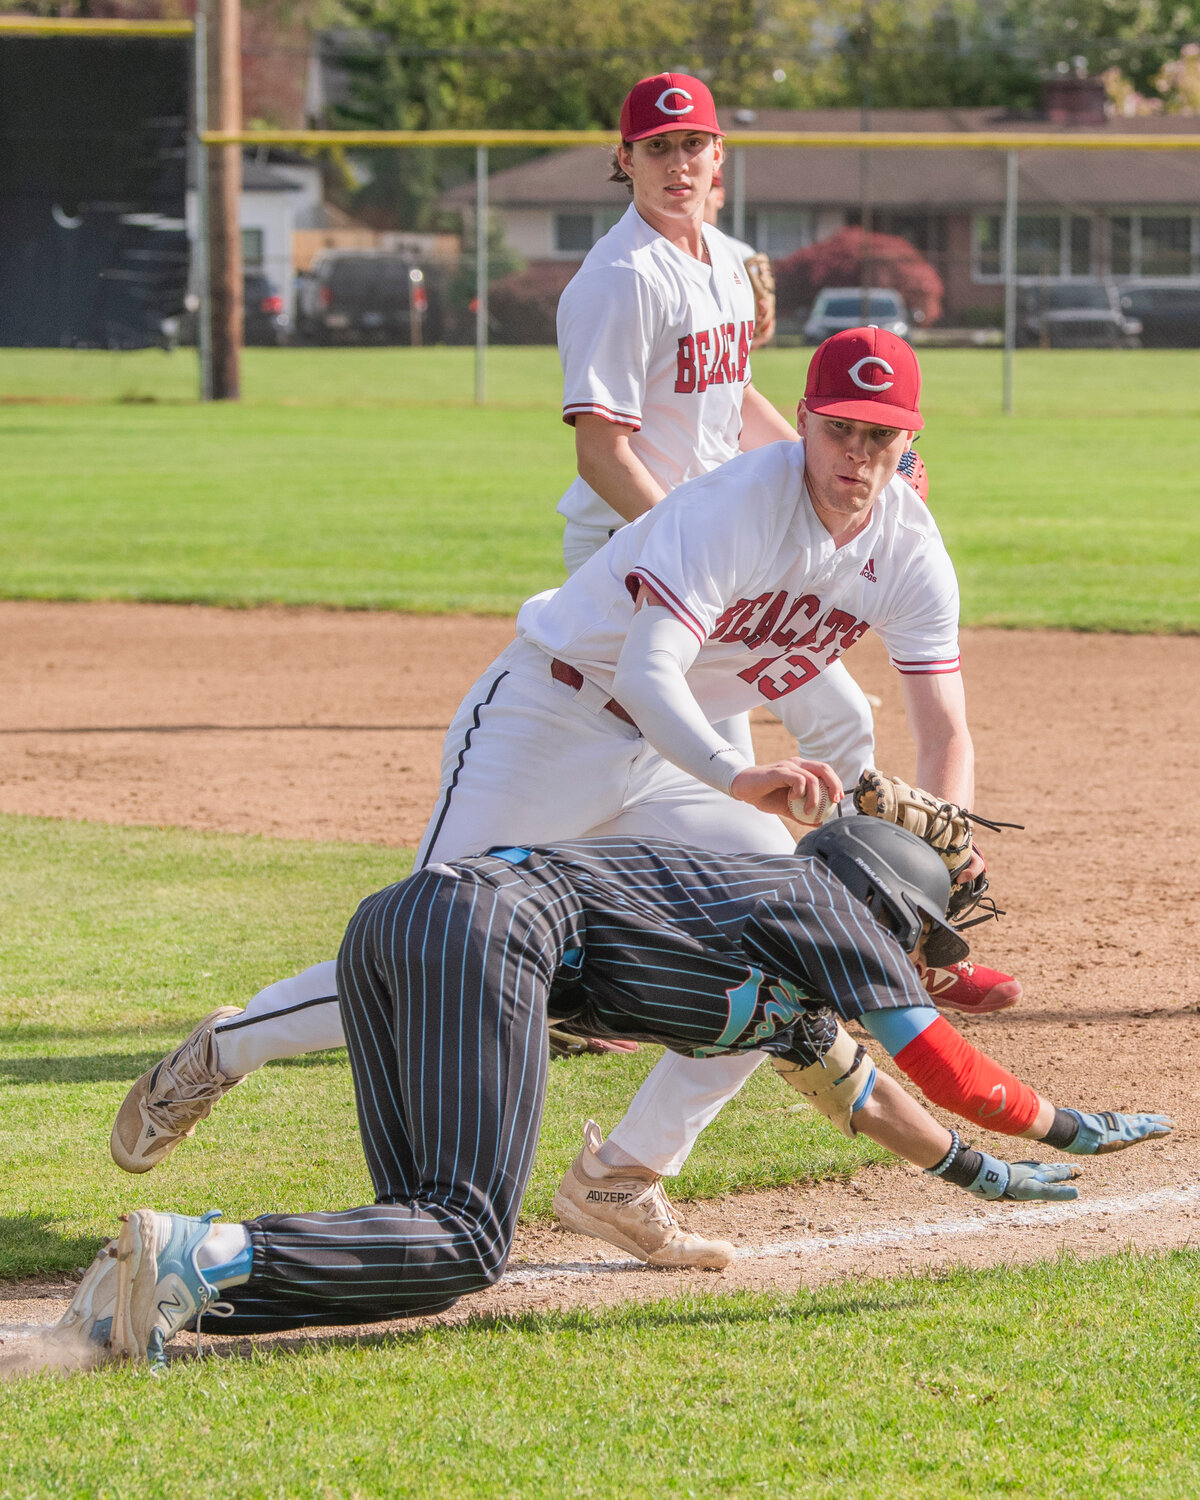 W.F. West’s Gavin Fugate (13) stops a runner on his way to first making an out during a game against Mark Morris at Bearcat Stadium in Chehalis on Tuesday, May 9.